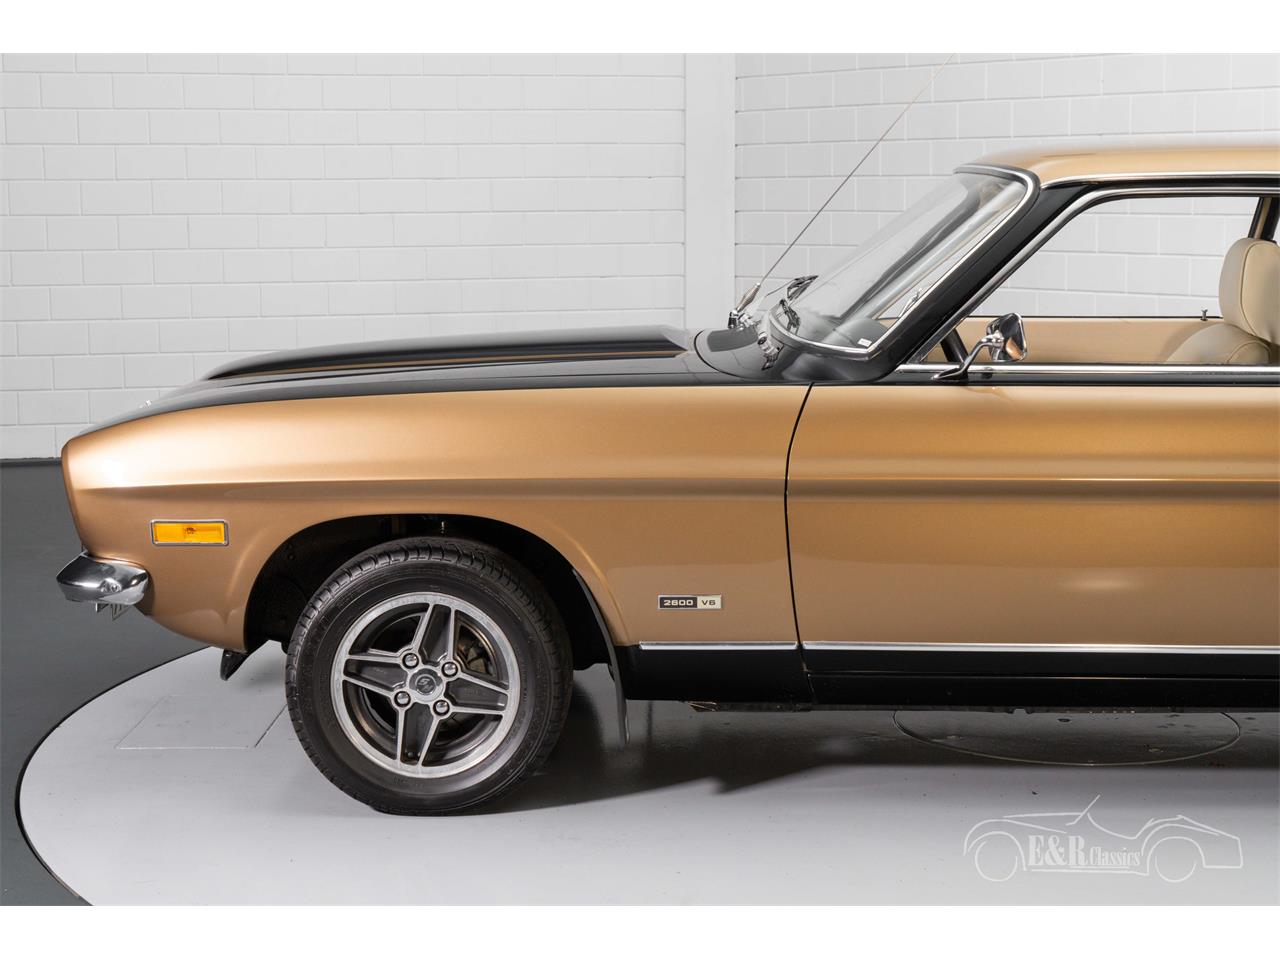 Used 1972 Ford Capri 2000 2 Door Sport Coupe Ratings, Values